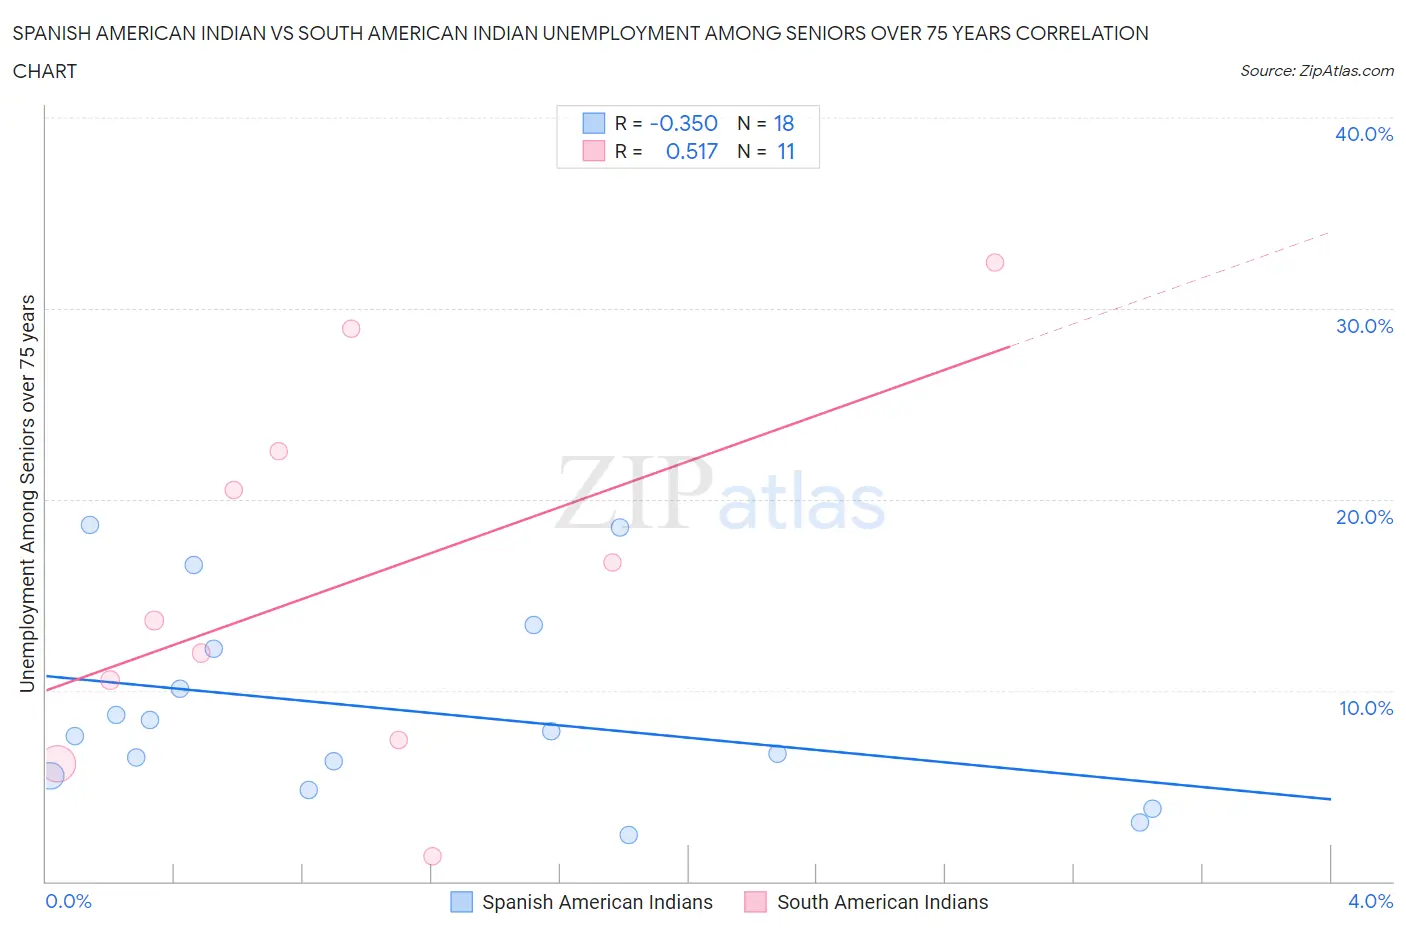 Spanish American Indian vs South American Indian Unemployment Among Seniors over 75 years